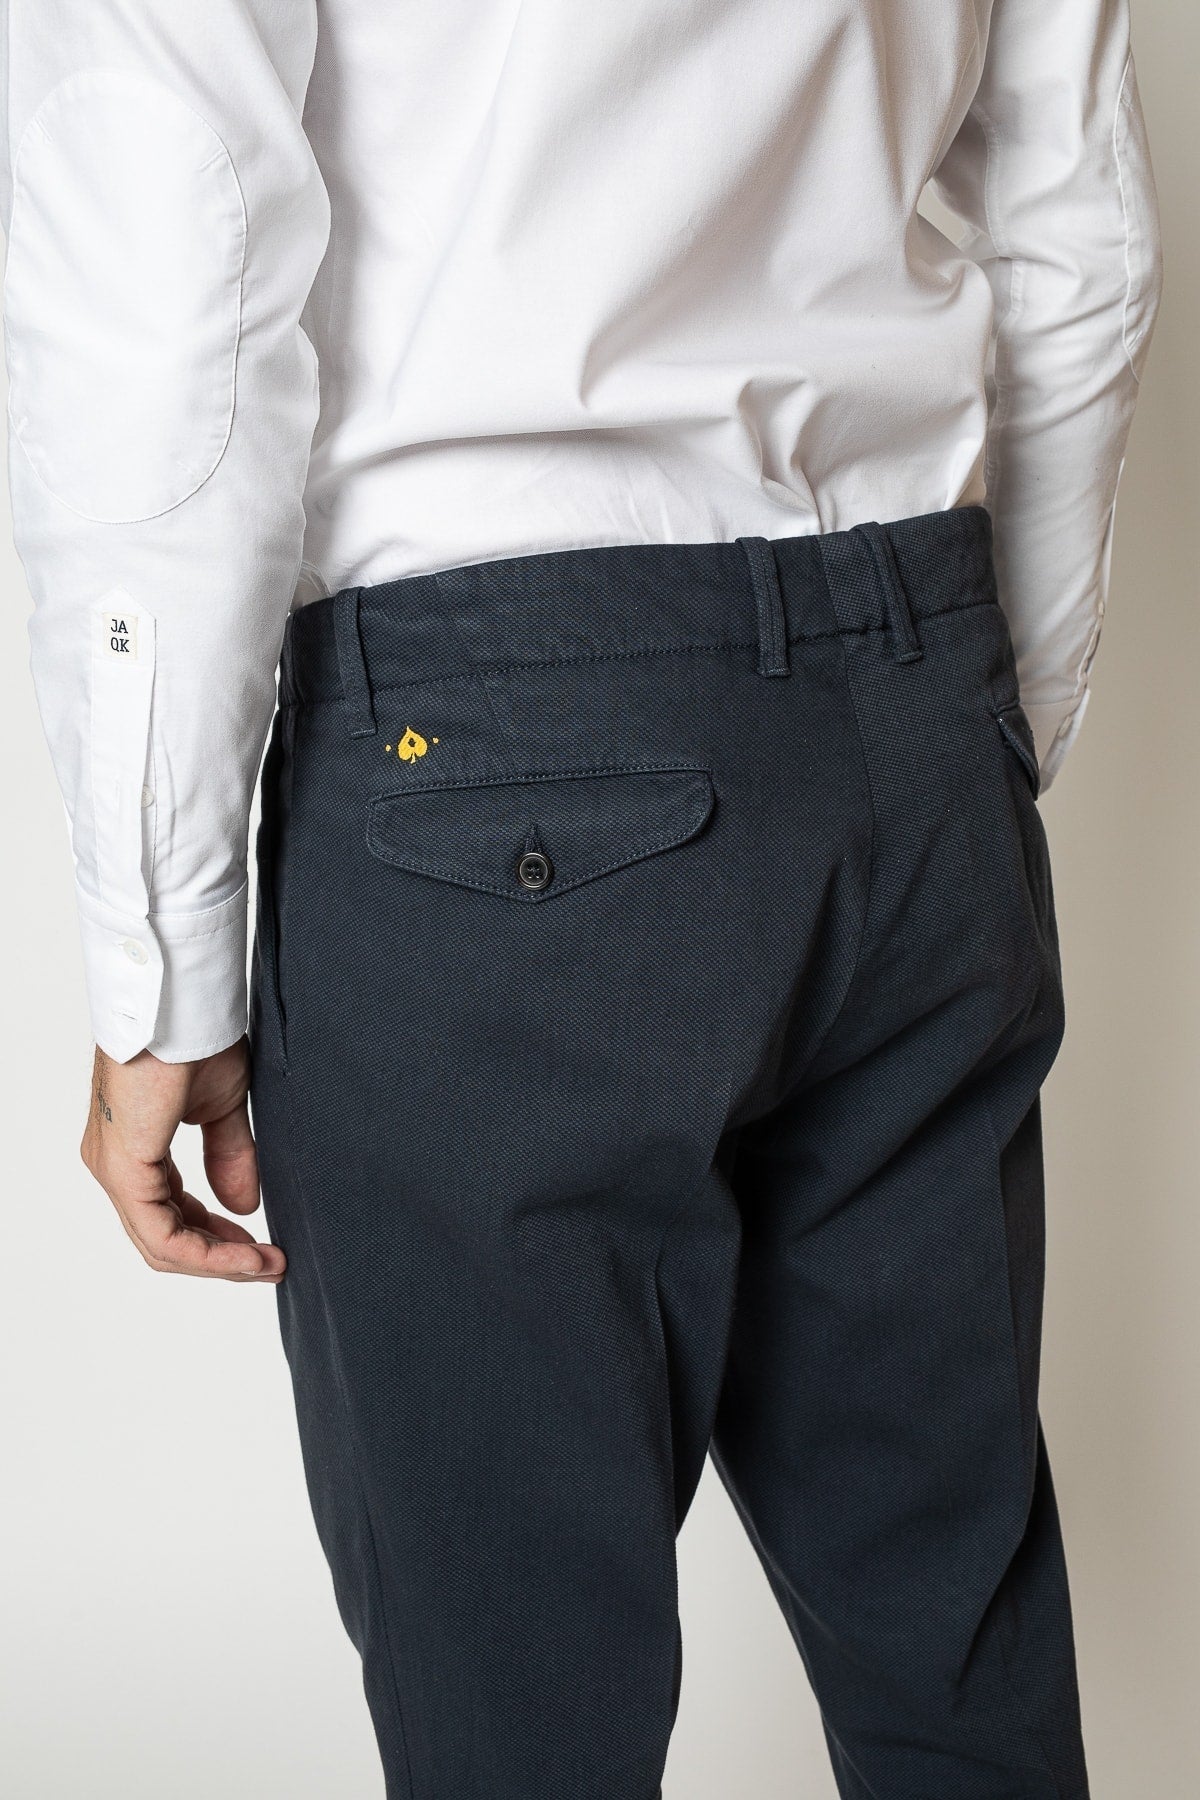 Jaqk - Navy Blue Trousers - Closer - The Good Chic